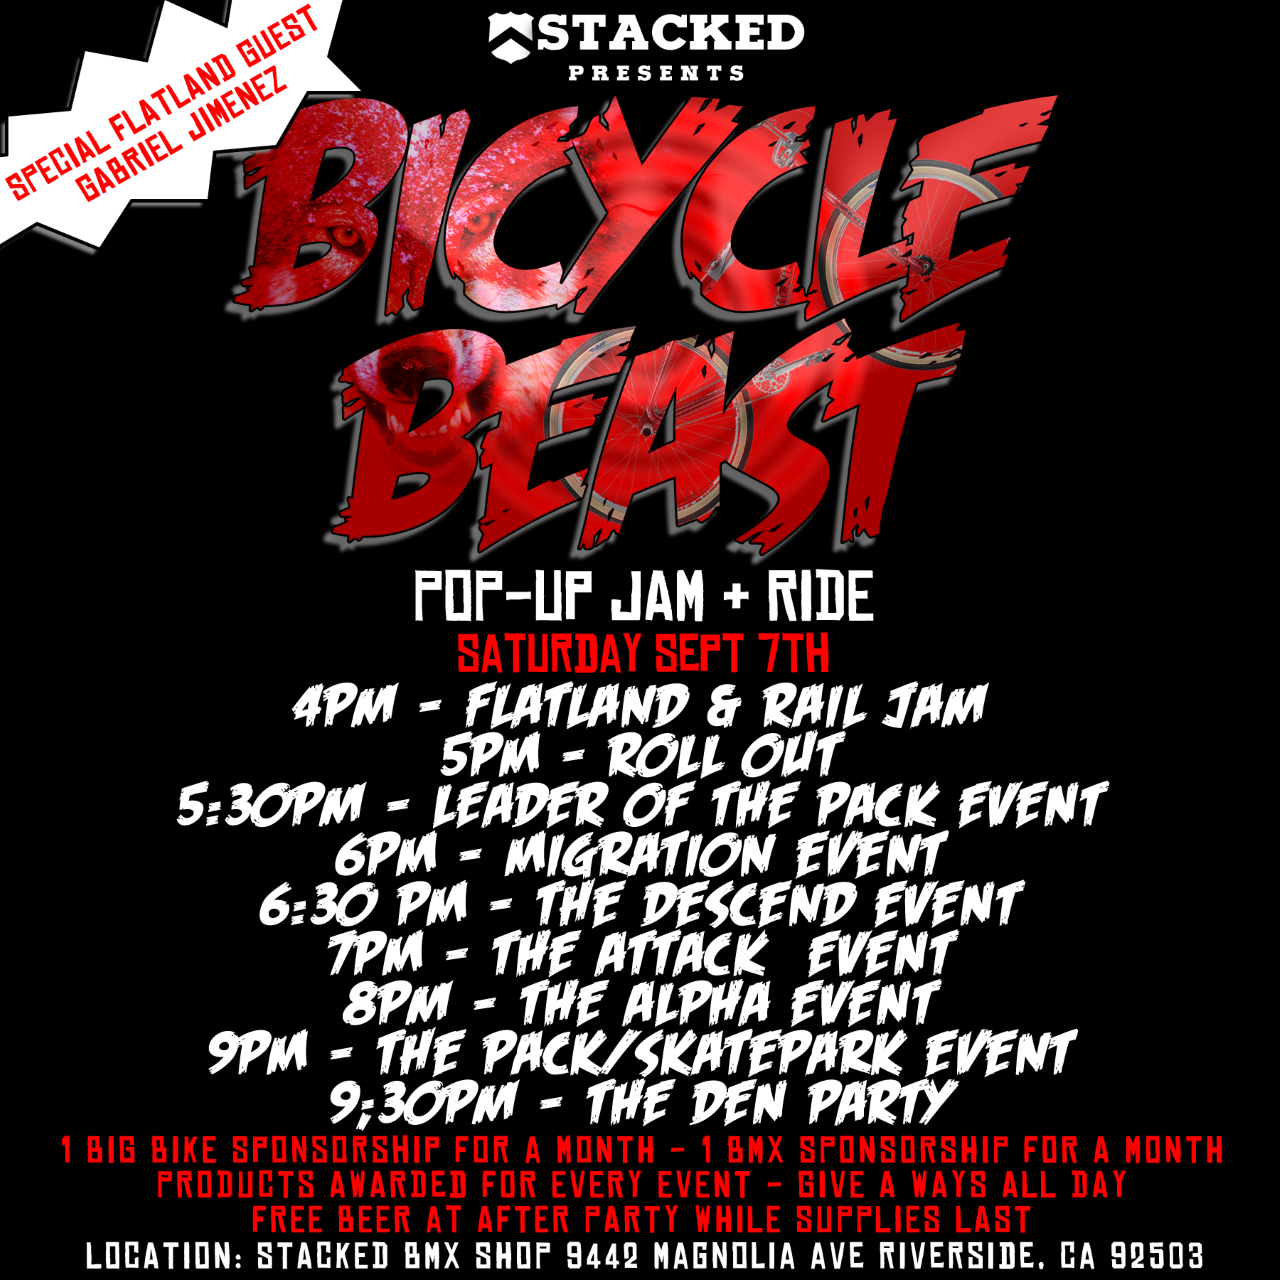 Stacked - Bicycle beast pop-up jam & ride